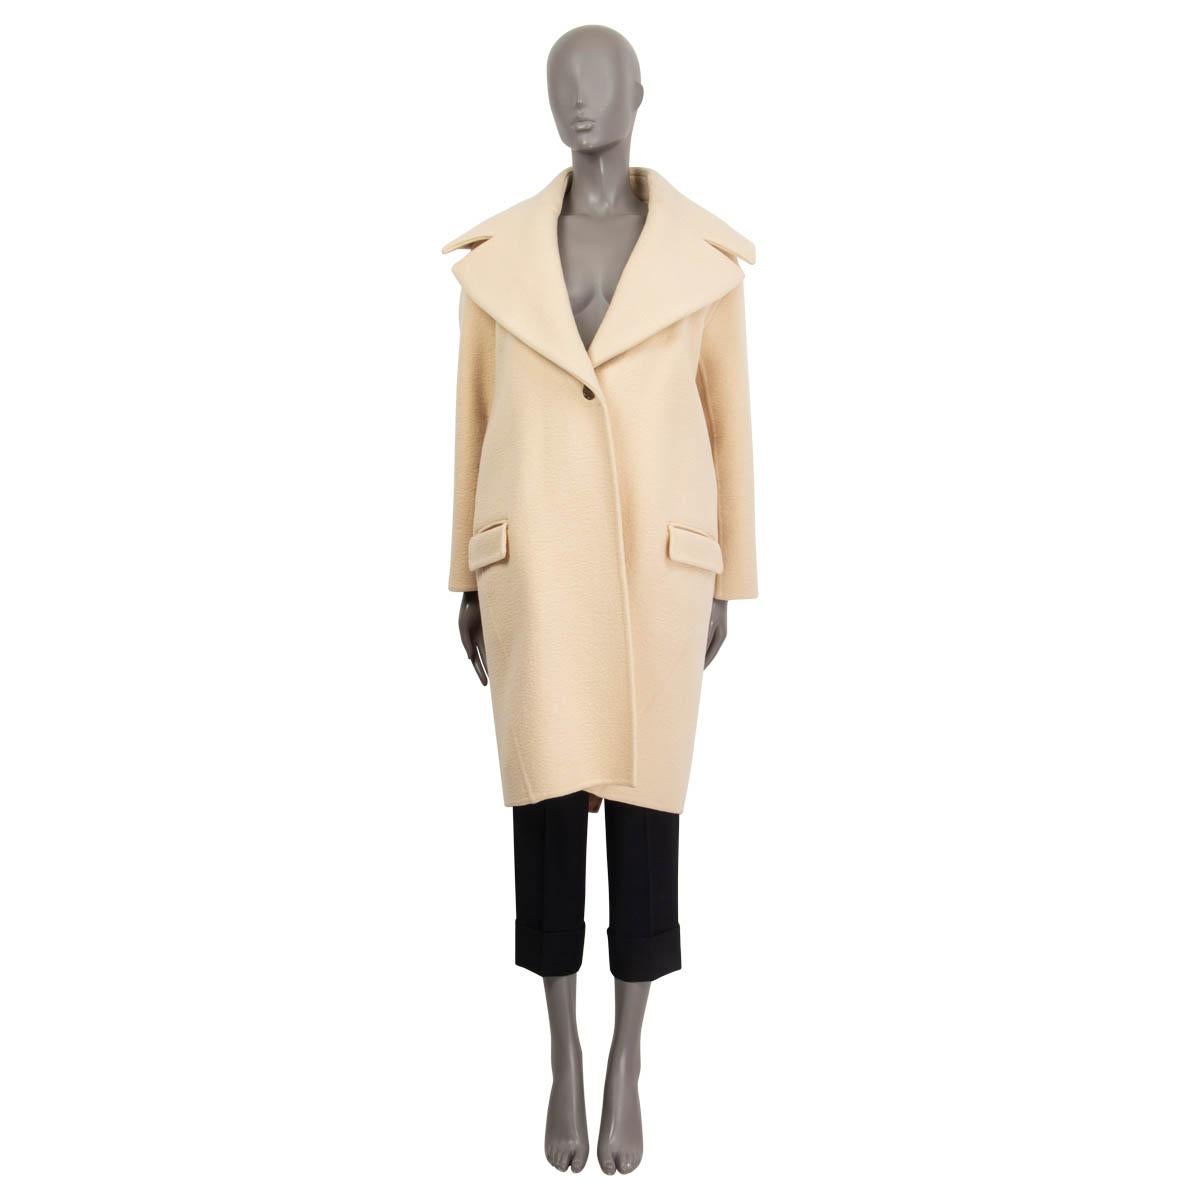 100% authentic Céline by Phoebe Philo back-belted coat in ivory cashmere (100%). Fall/winter 2013. Features a wide collar, two slit pockets on the front and an oversized fit. Opens with one gold-tone button on the front. Sleeves and pockets lined in